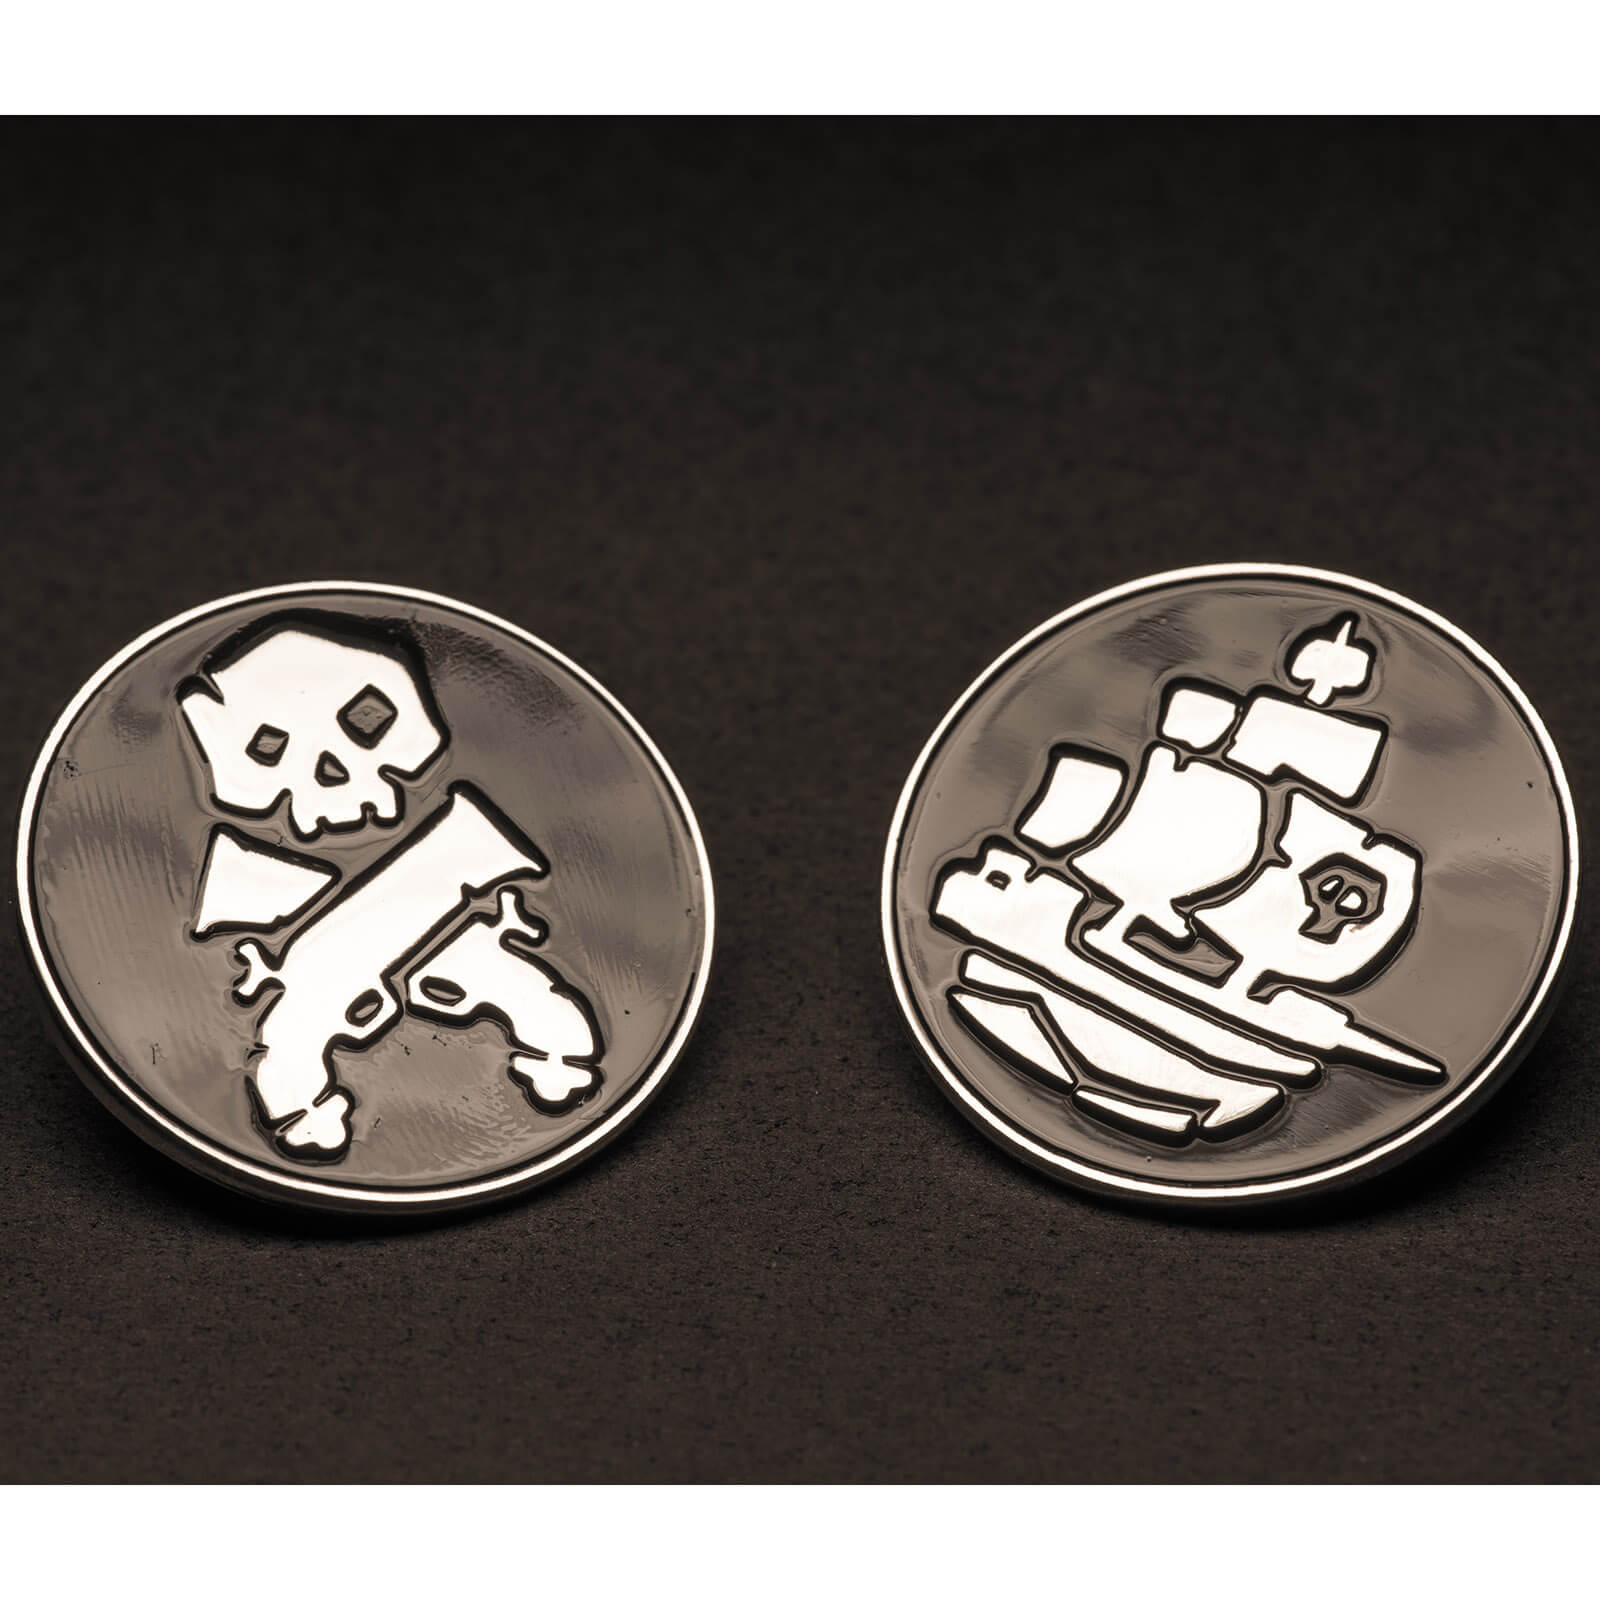 Image of Sea of Thieves Limited Edition Pin Badge Set